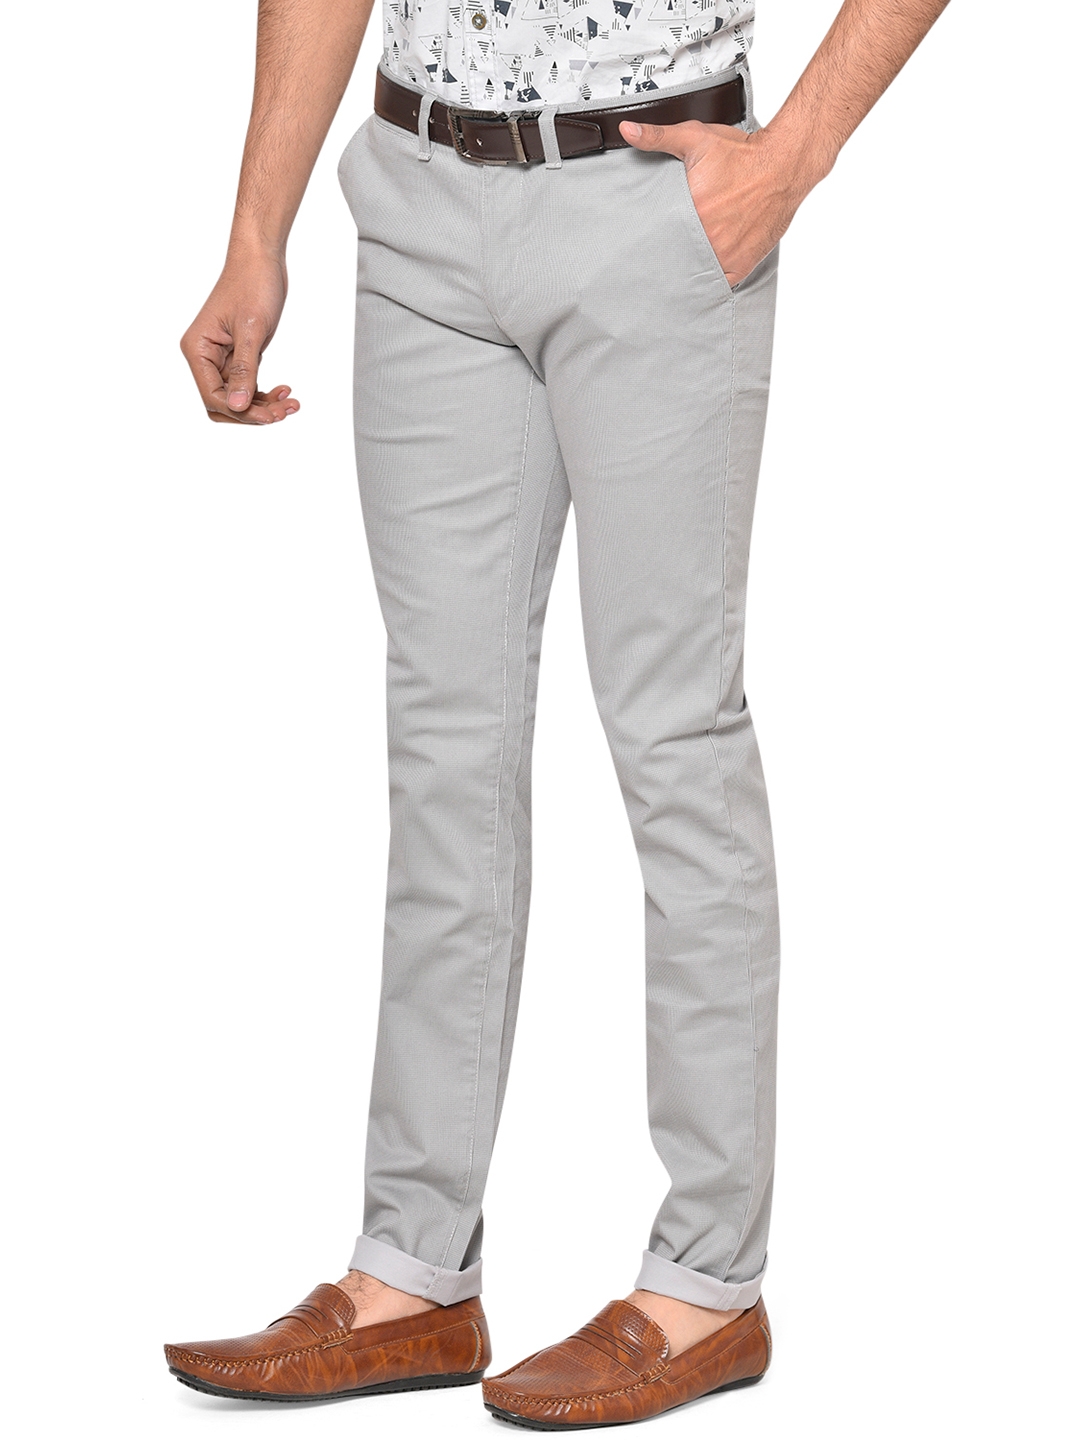 Greenfibre | Steel Grey Solid Super Slim Fit Casual Trouser | Greenfibre 3